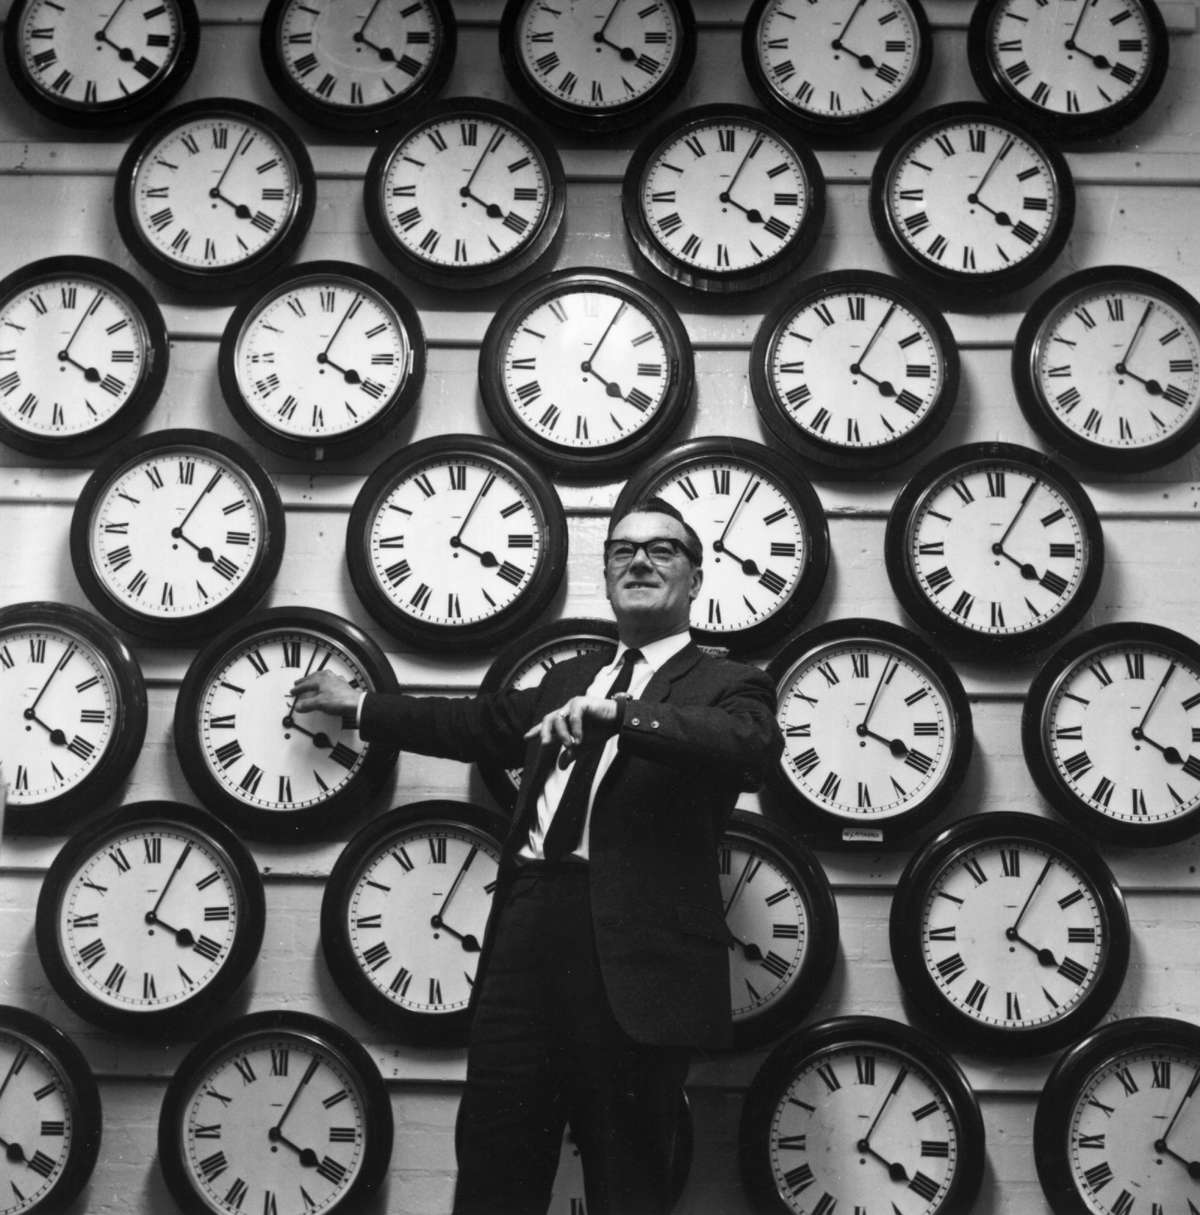 Man in Front of Wall of Clocks